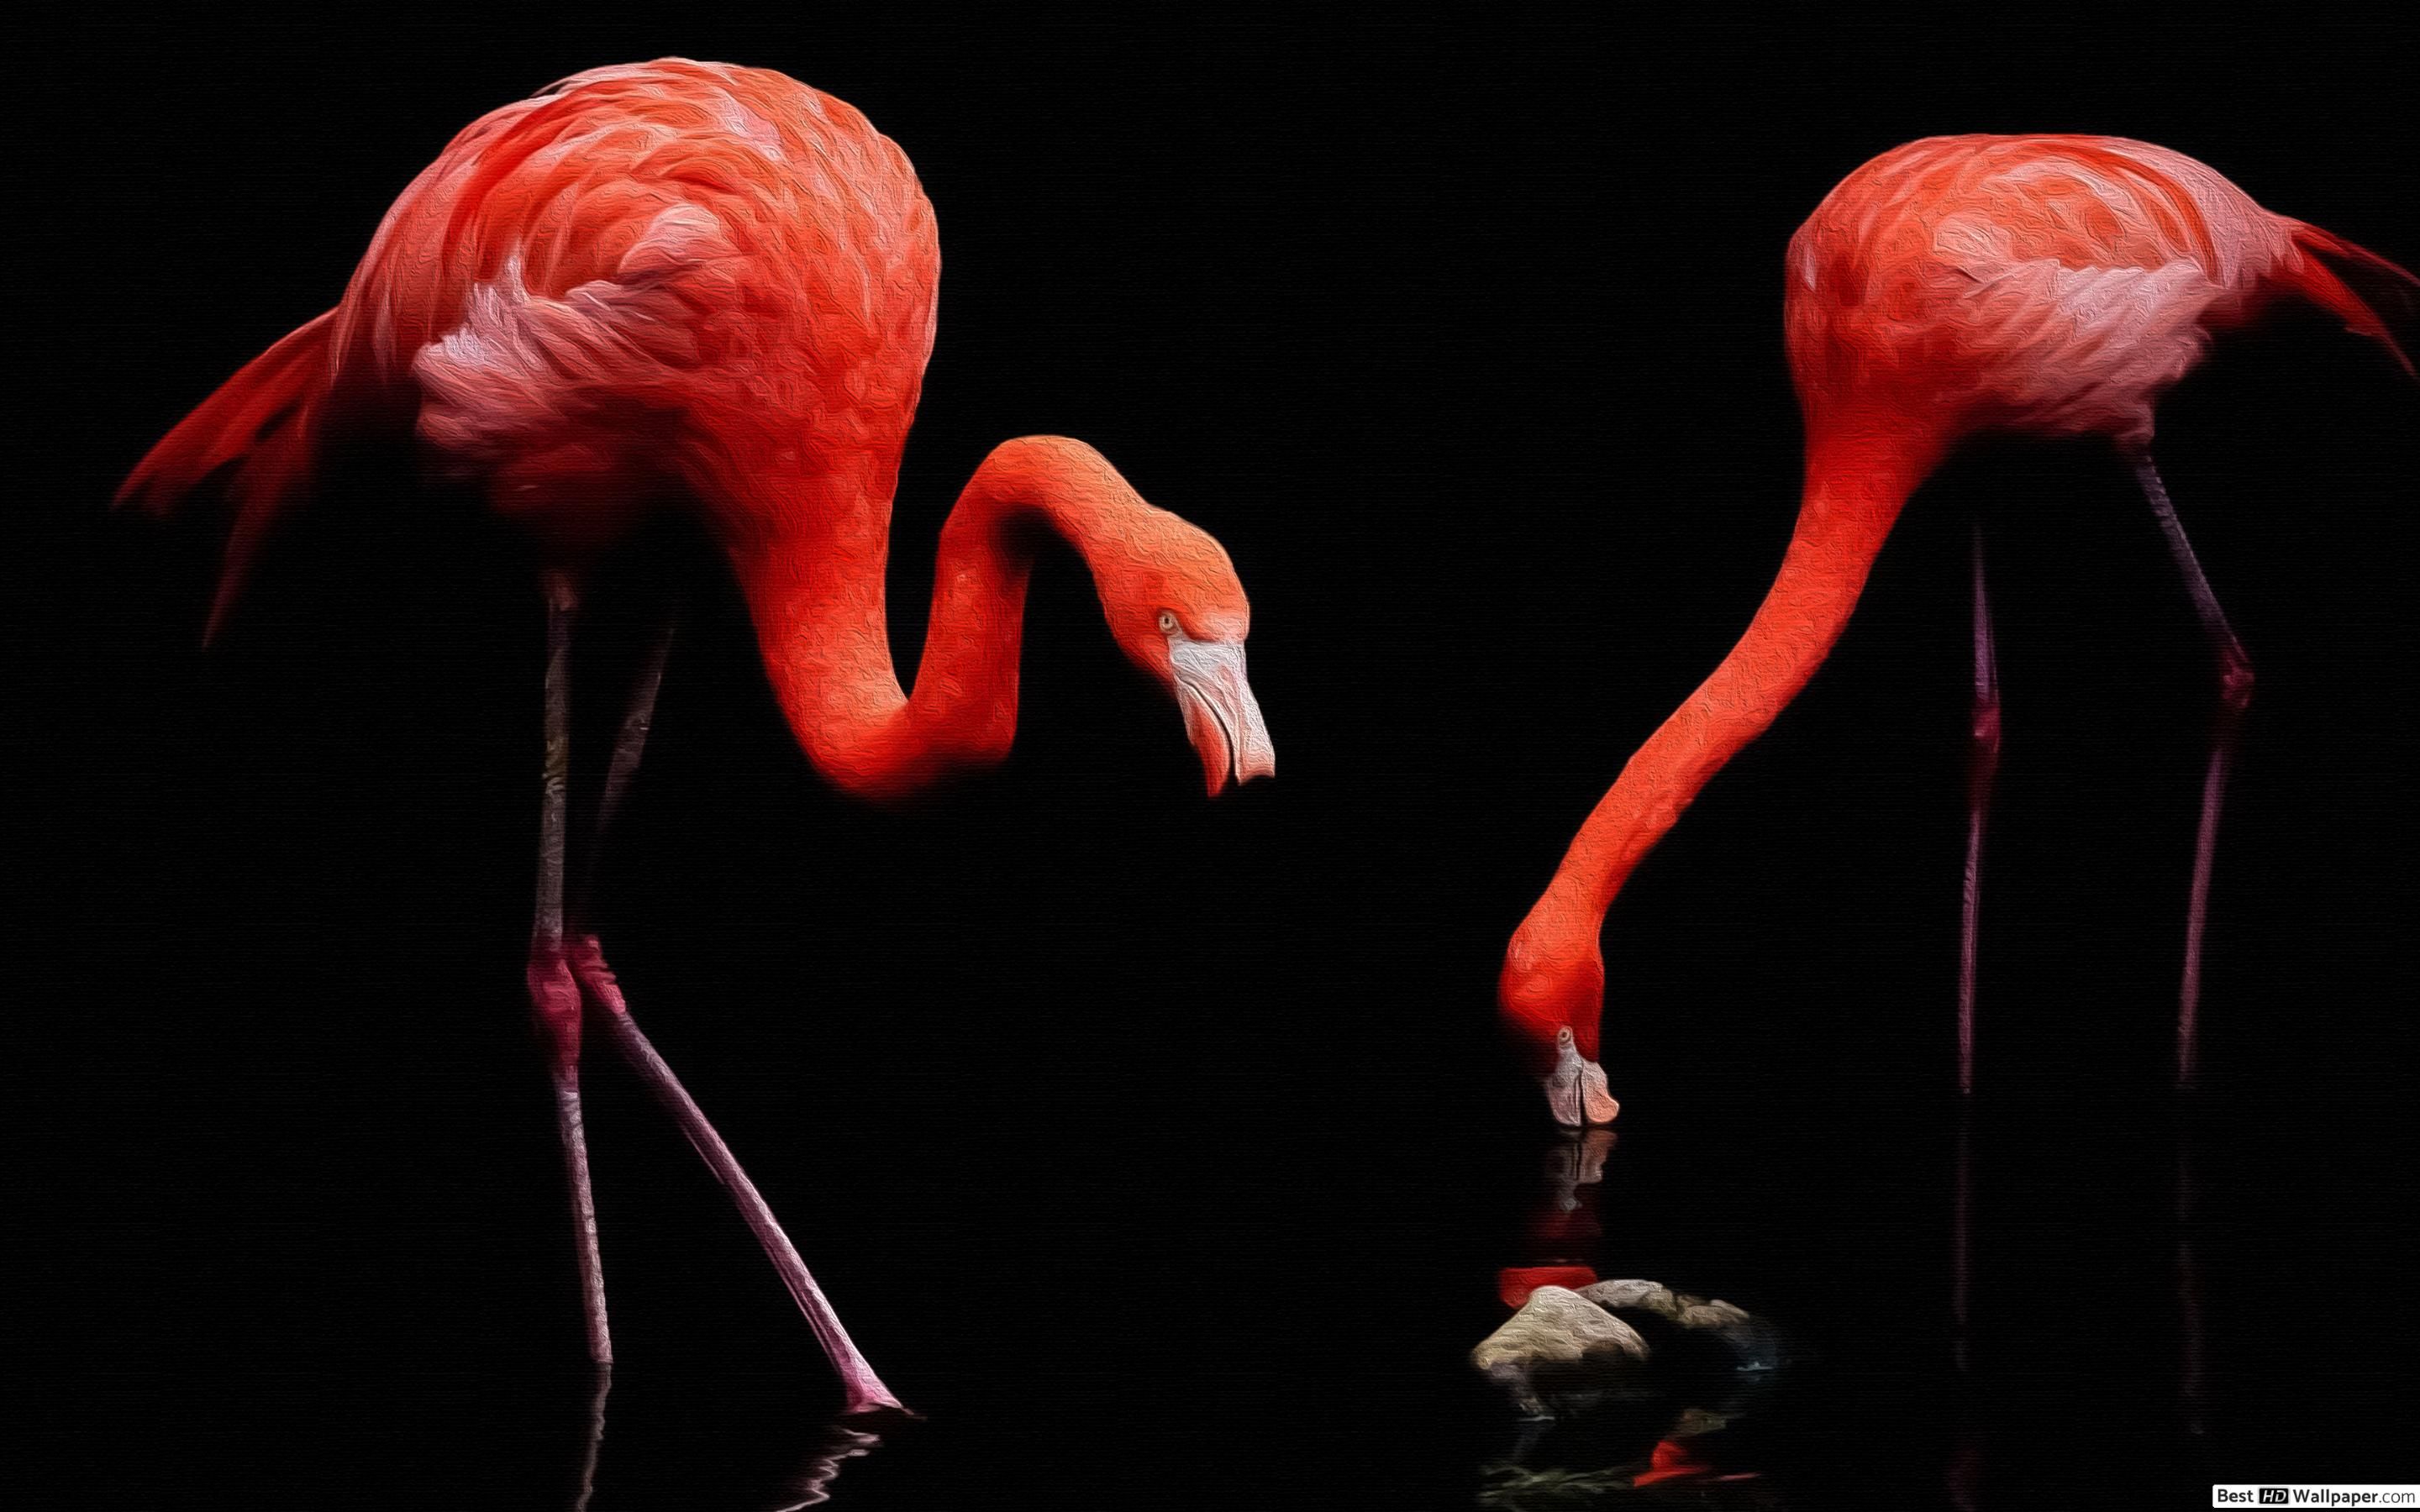 Painting of two flamingos HD wallpaper download